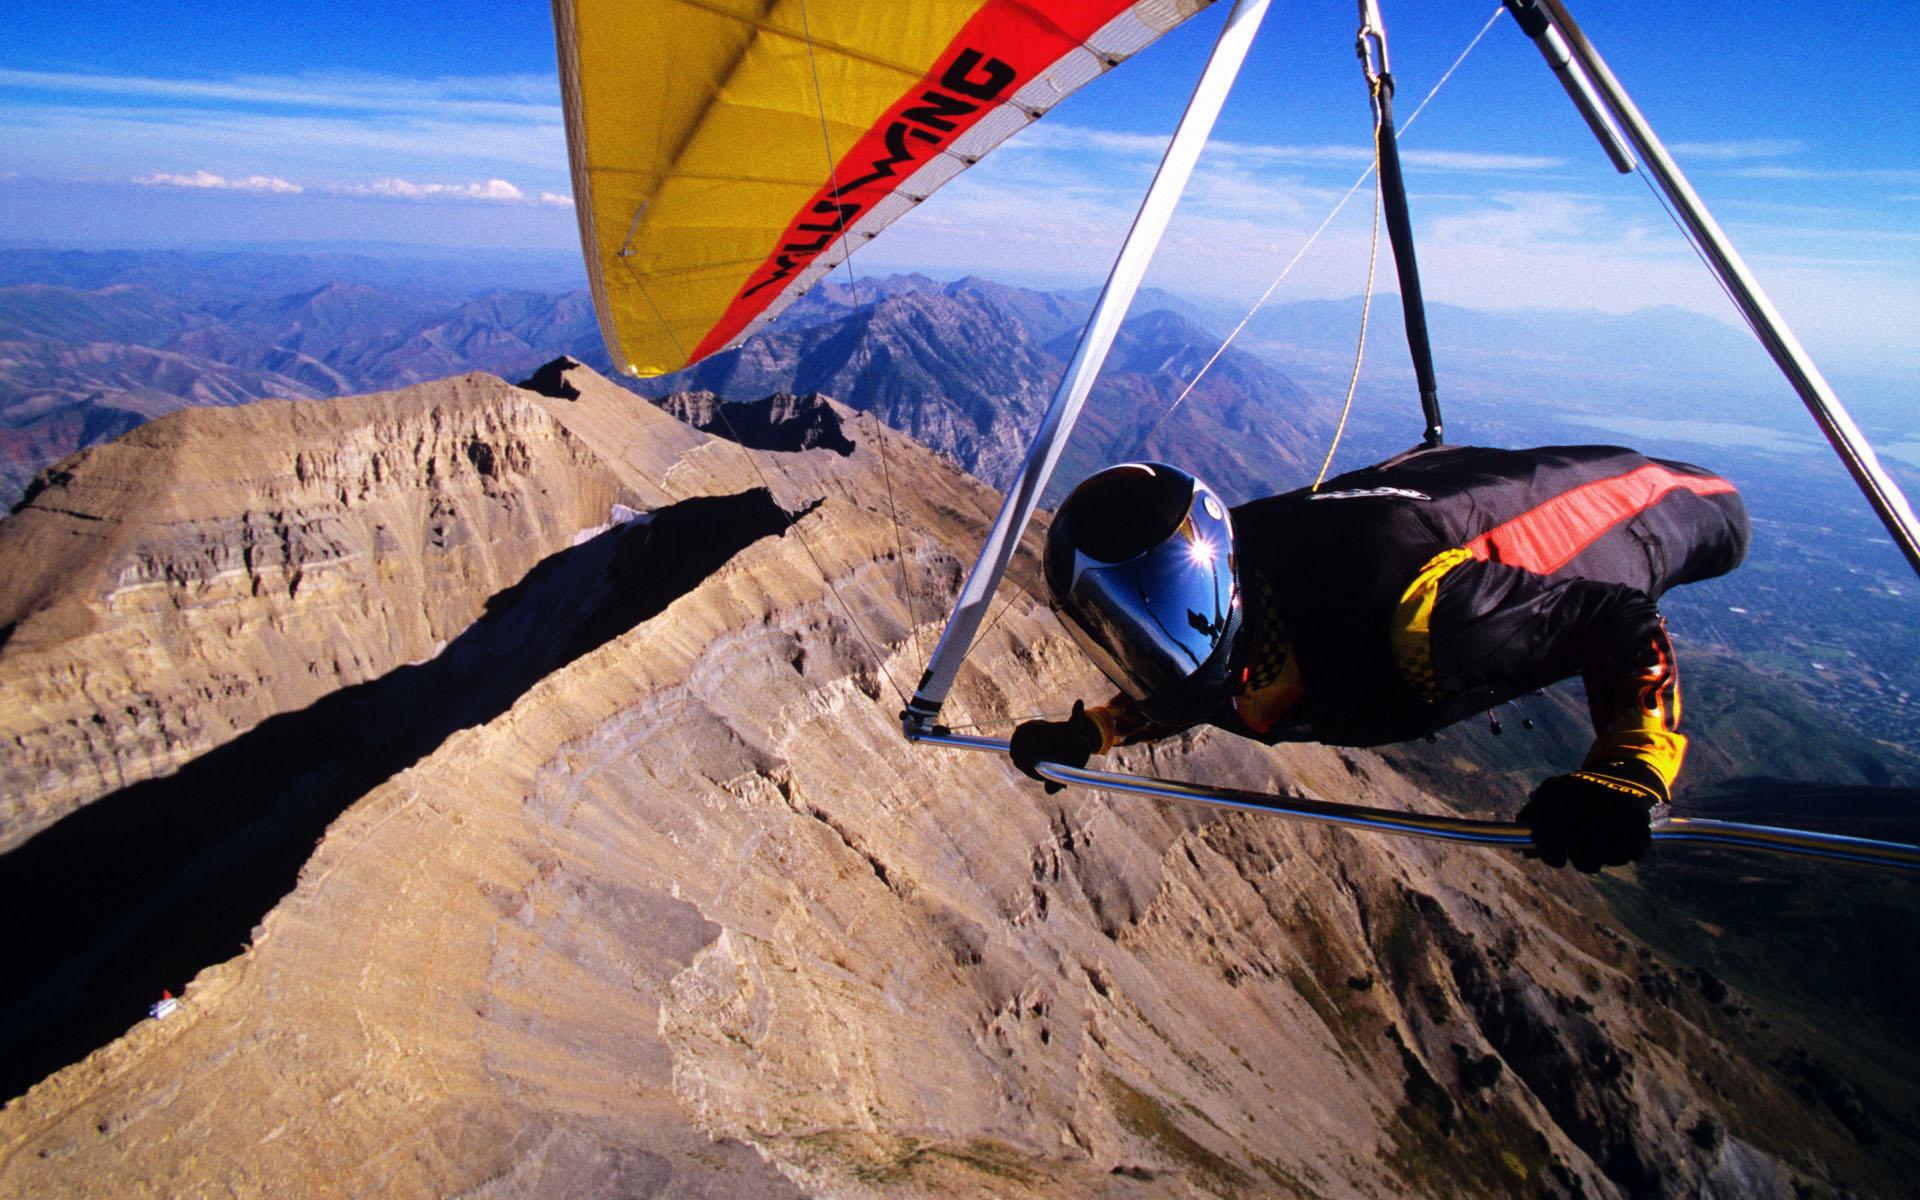 Hang Gliding Wallpaper and Background Image